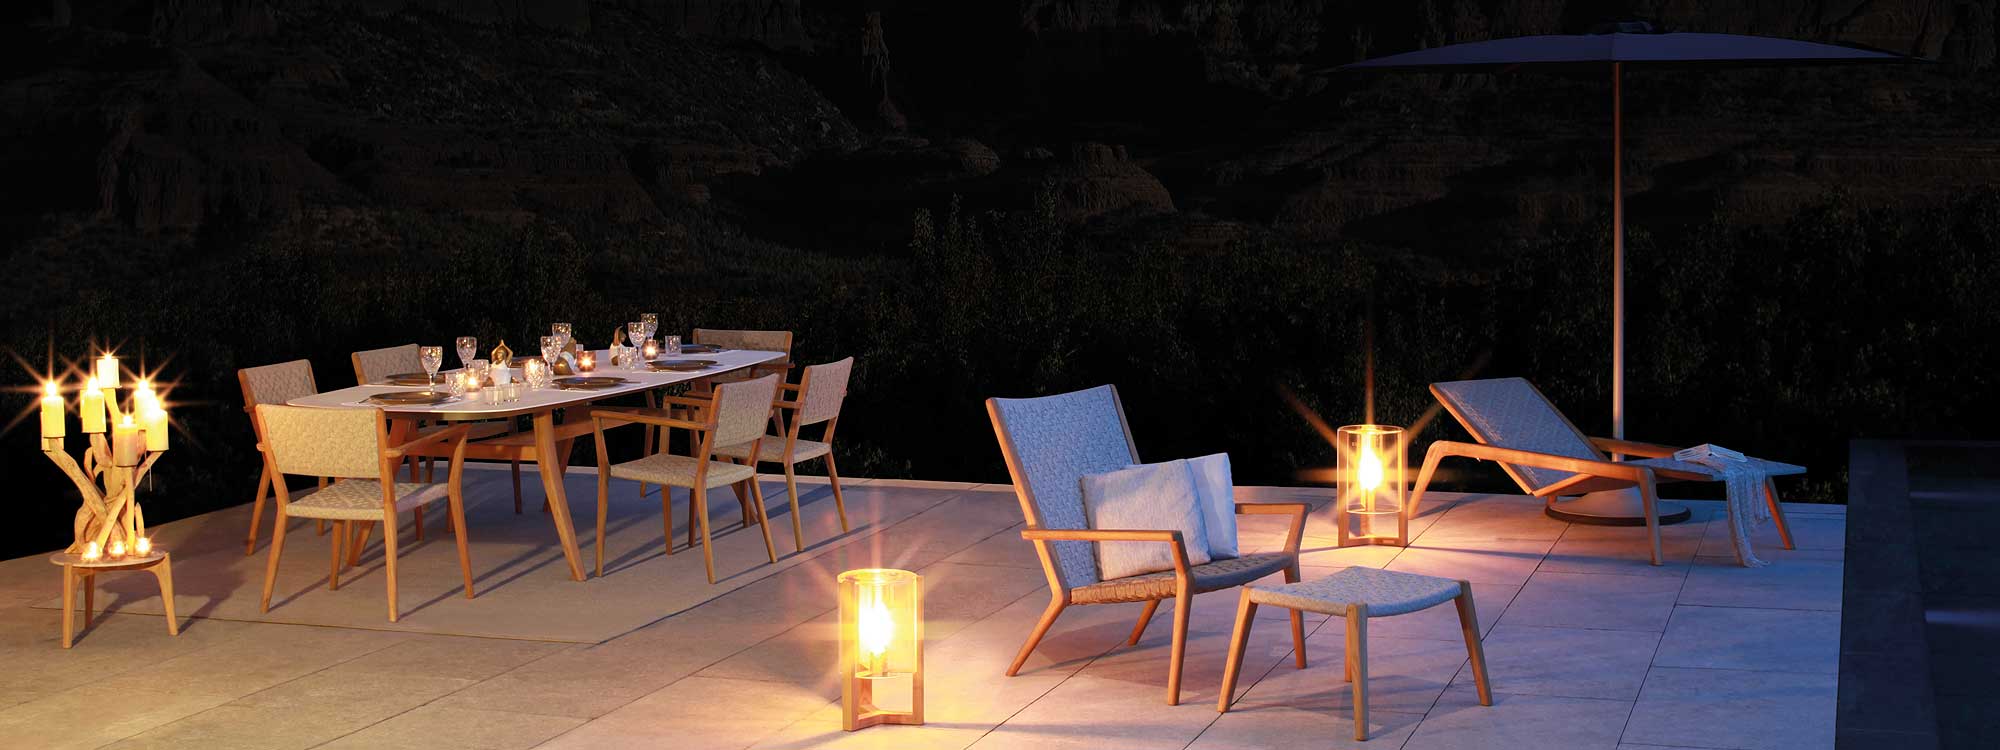 Nighttime shot of Vita modern garden lounge chair is a luxury outdoor easy chair & foot stool in high quality materials by Royal Britannia contemporary teak garden furniture